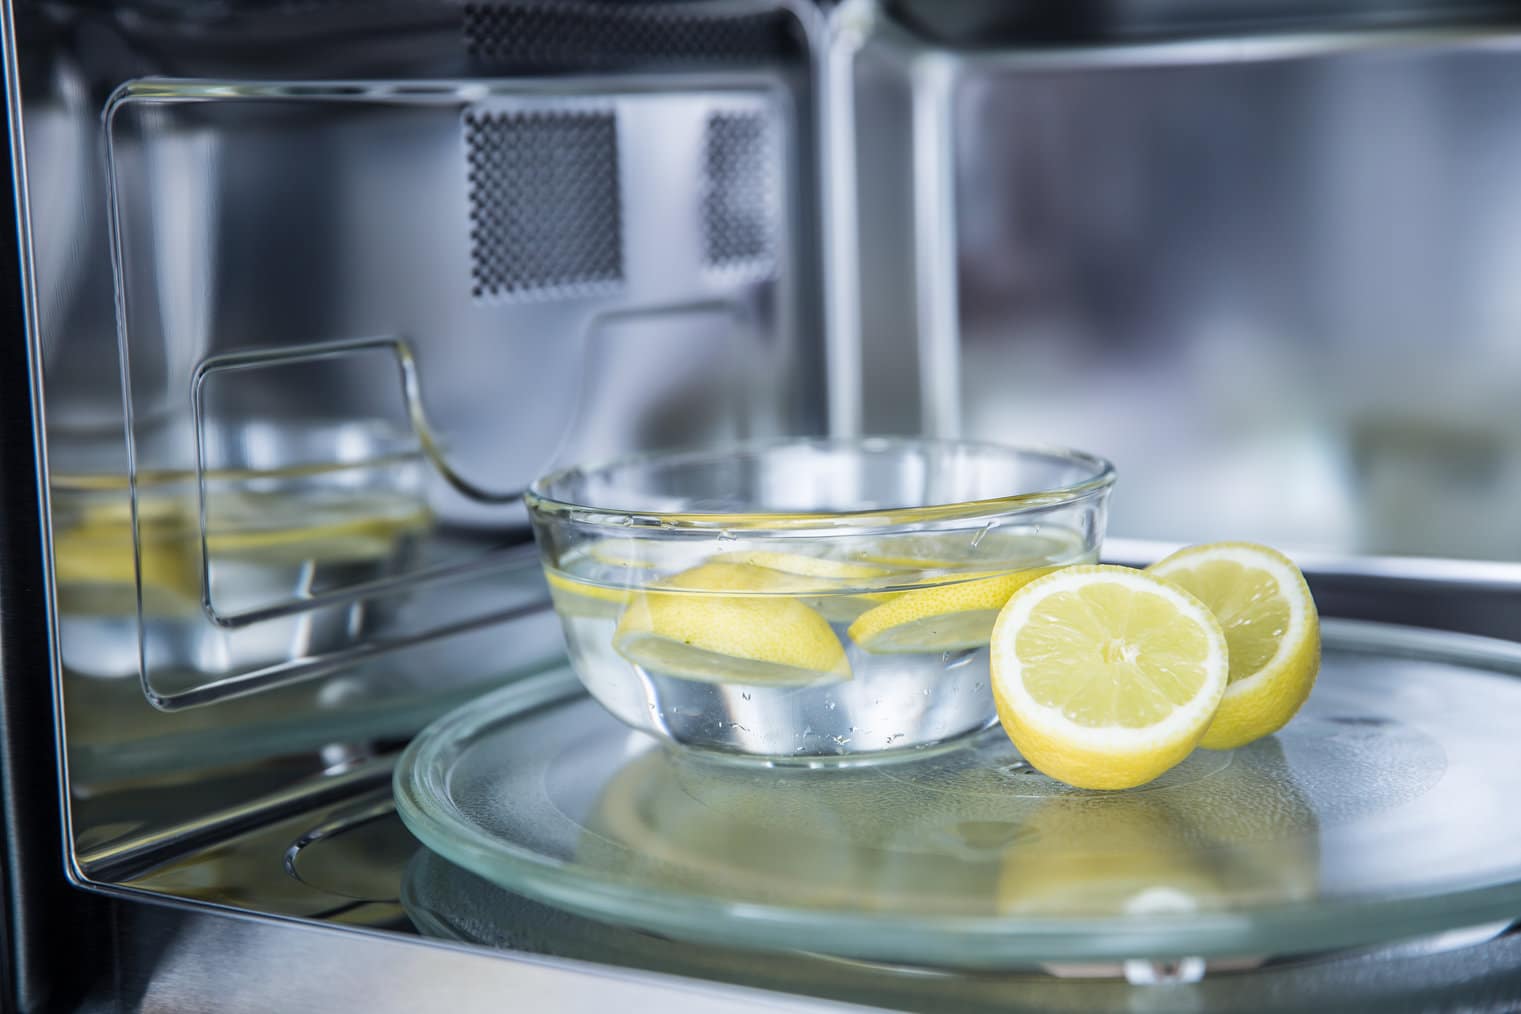 Cleaning tips like lemons in the microwave will save money